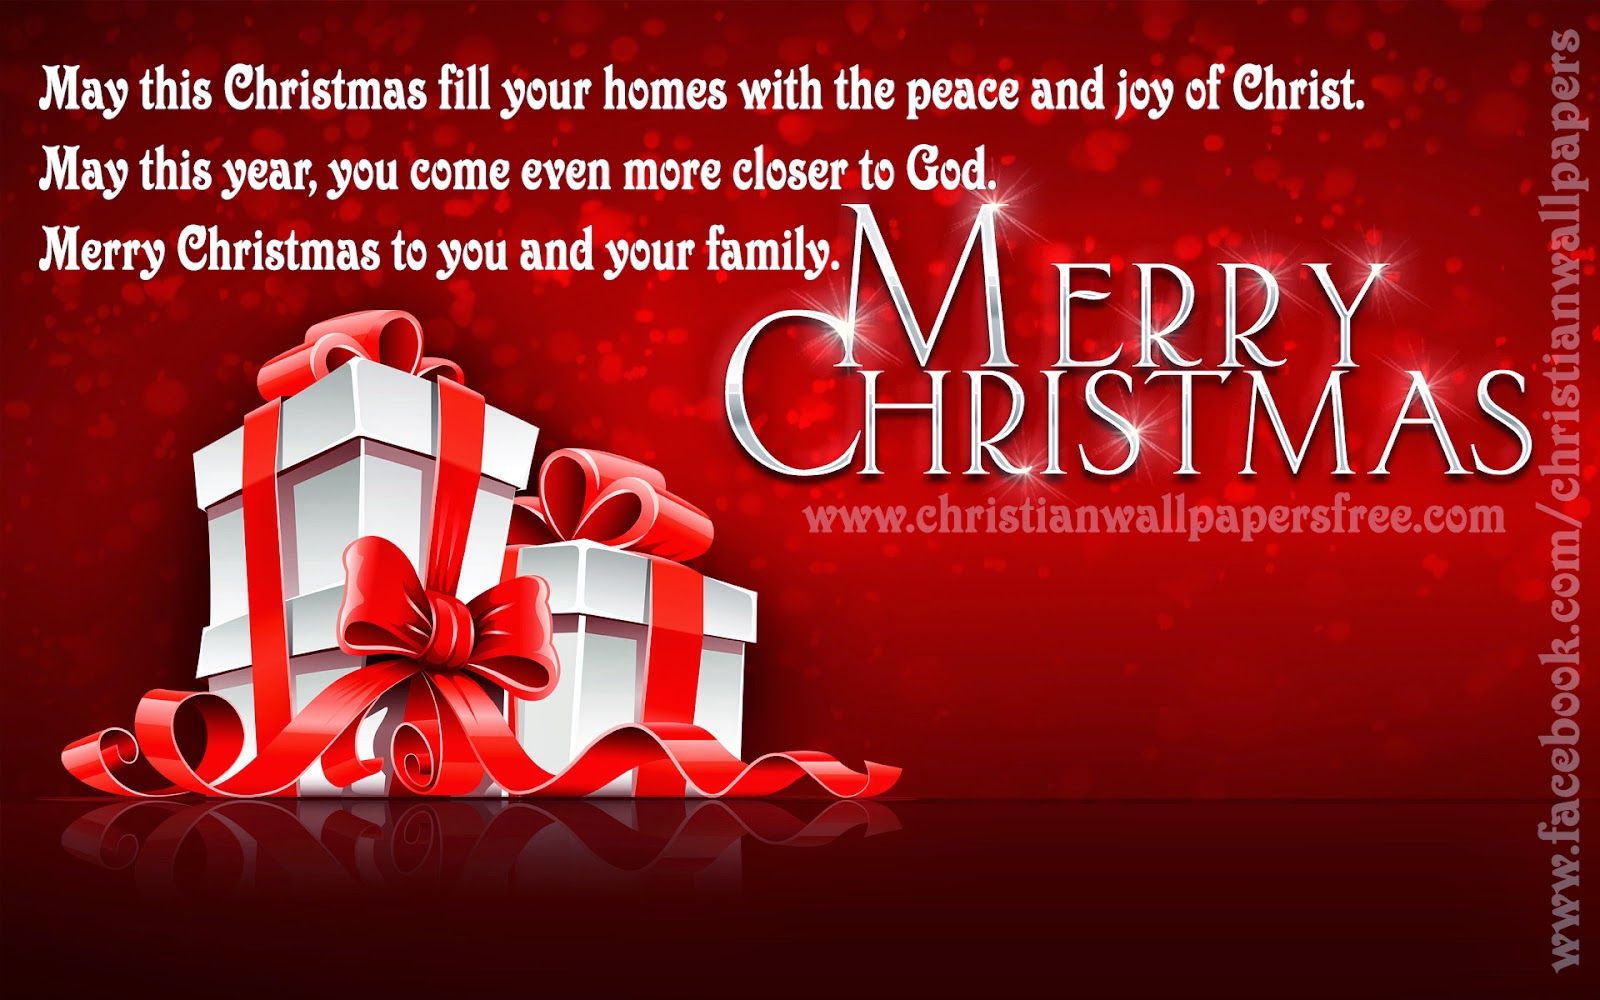 Christmas Greetings With Bible Verse